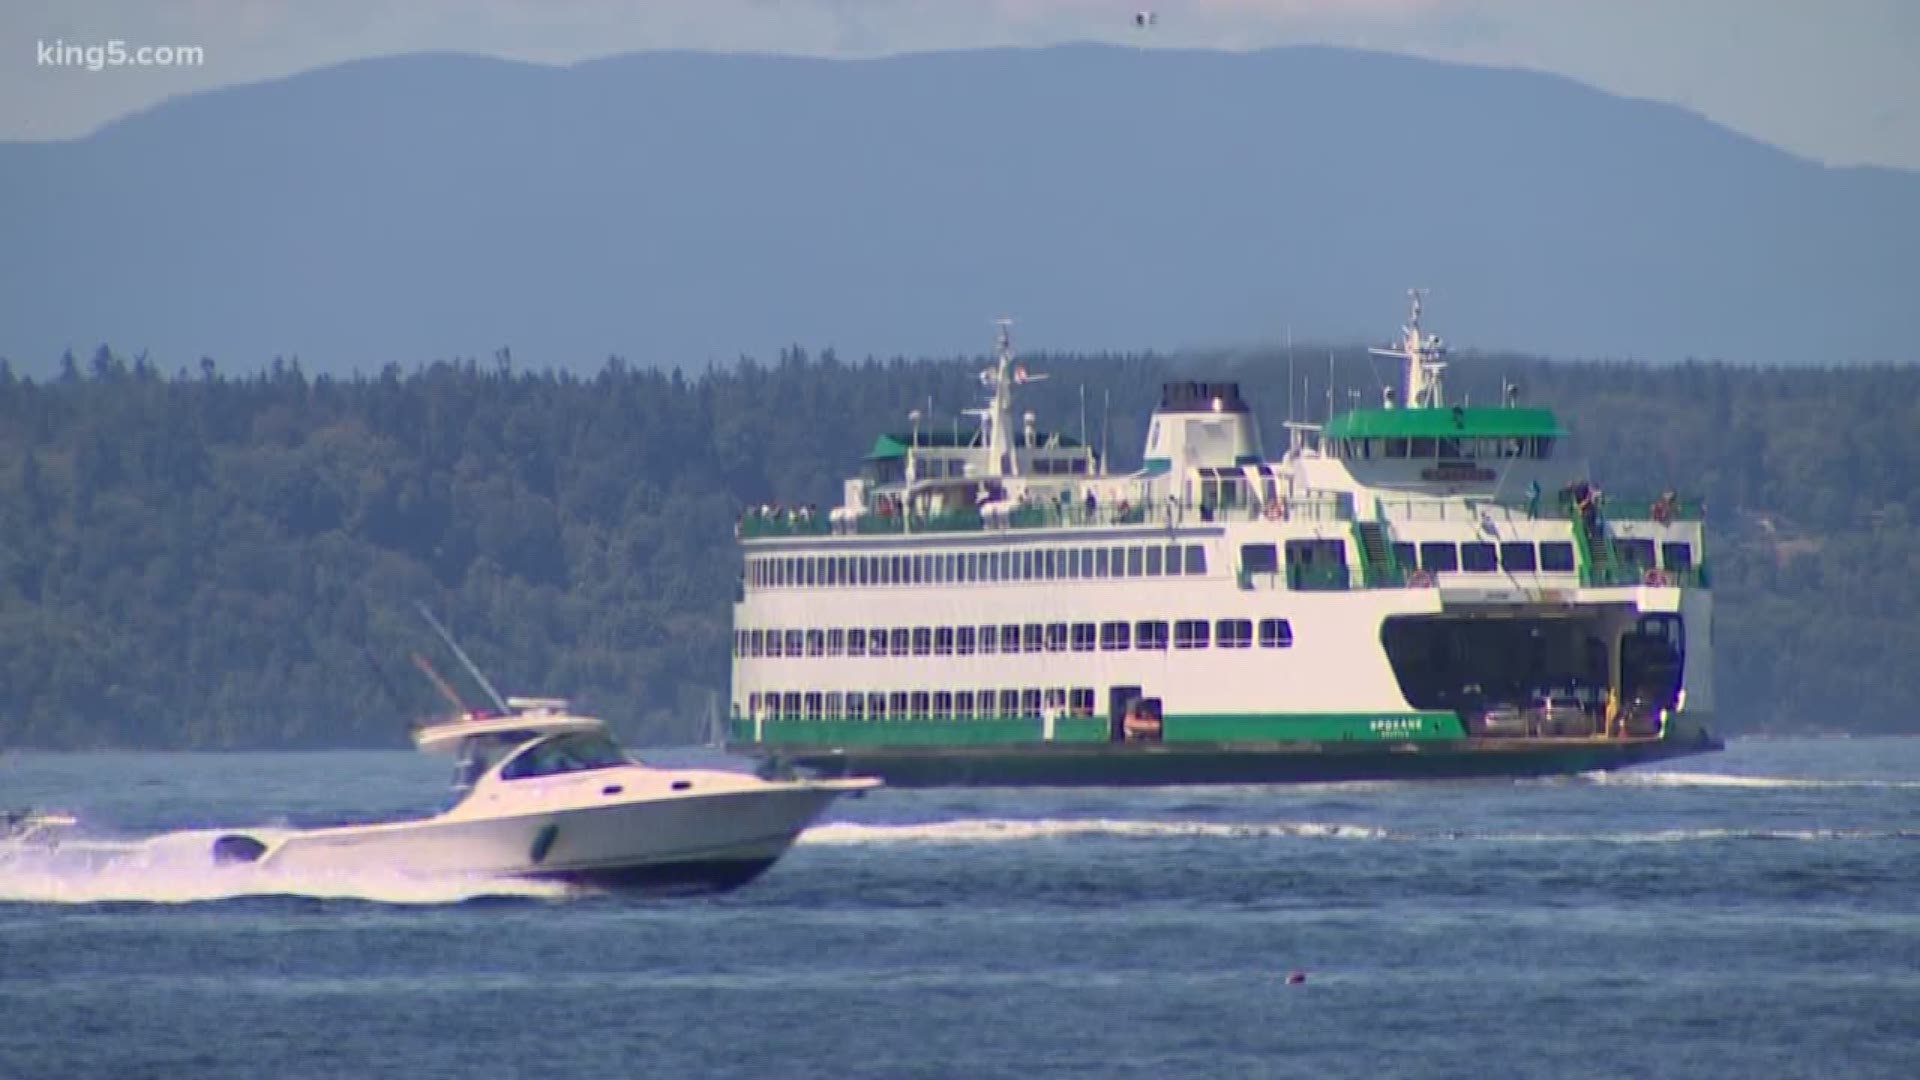 Officials are asking for help so ferries can safely navigate through the busy summer season on Washington's waterways.